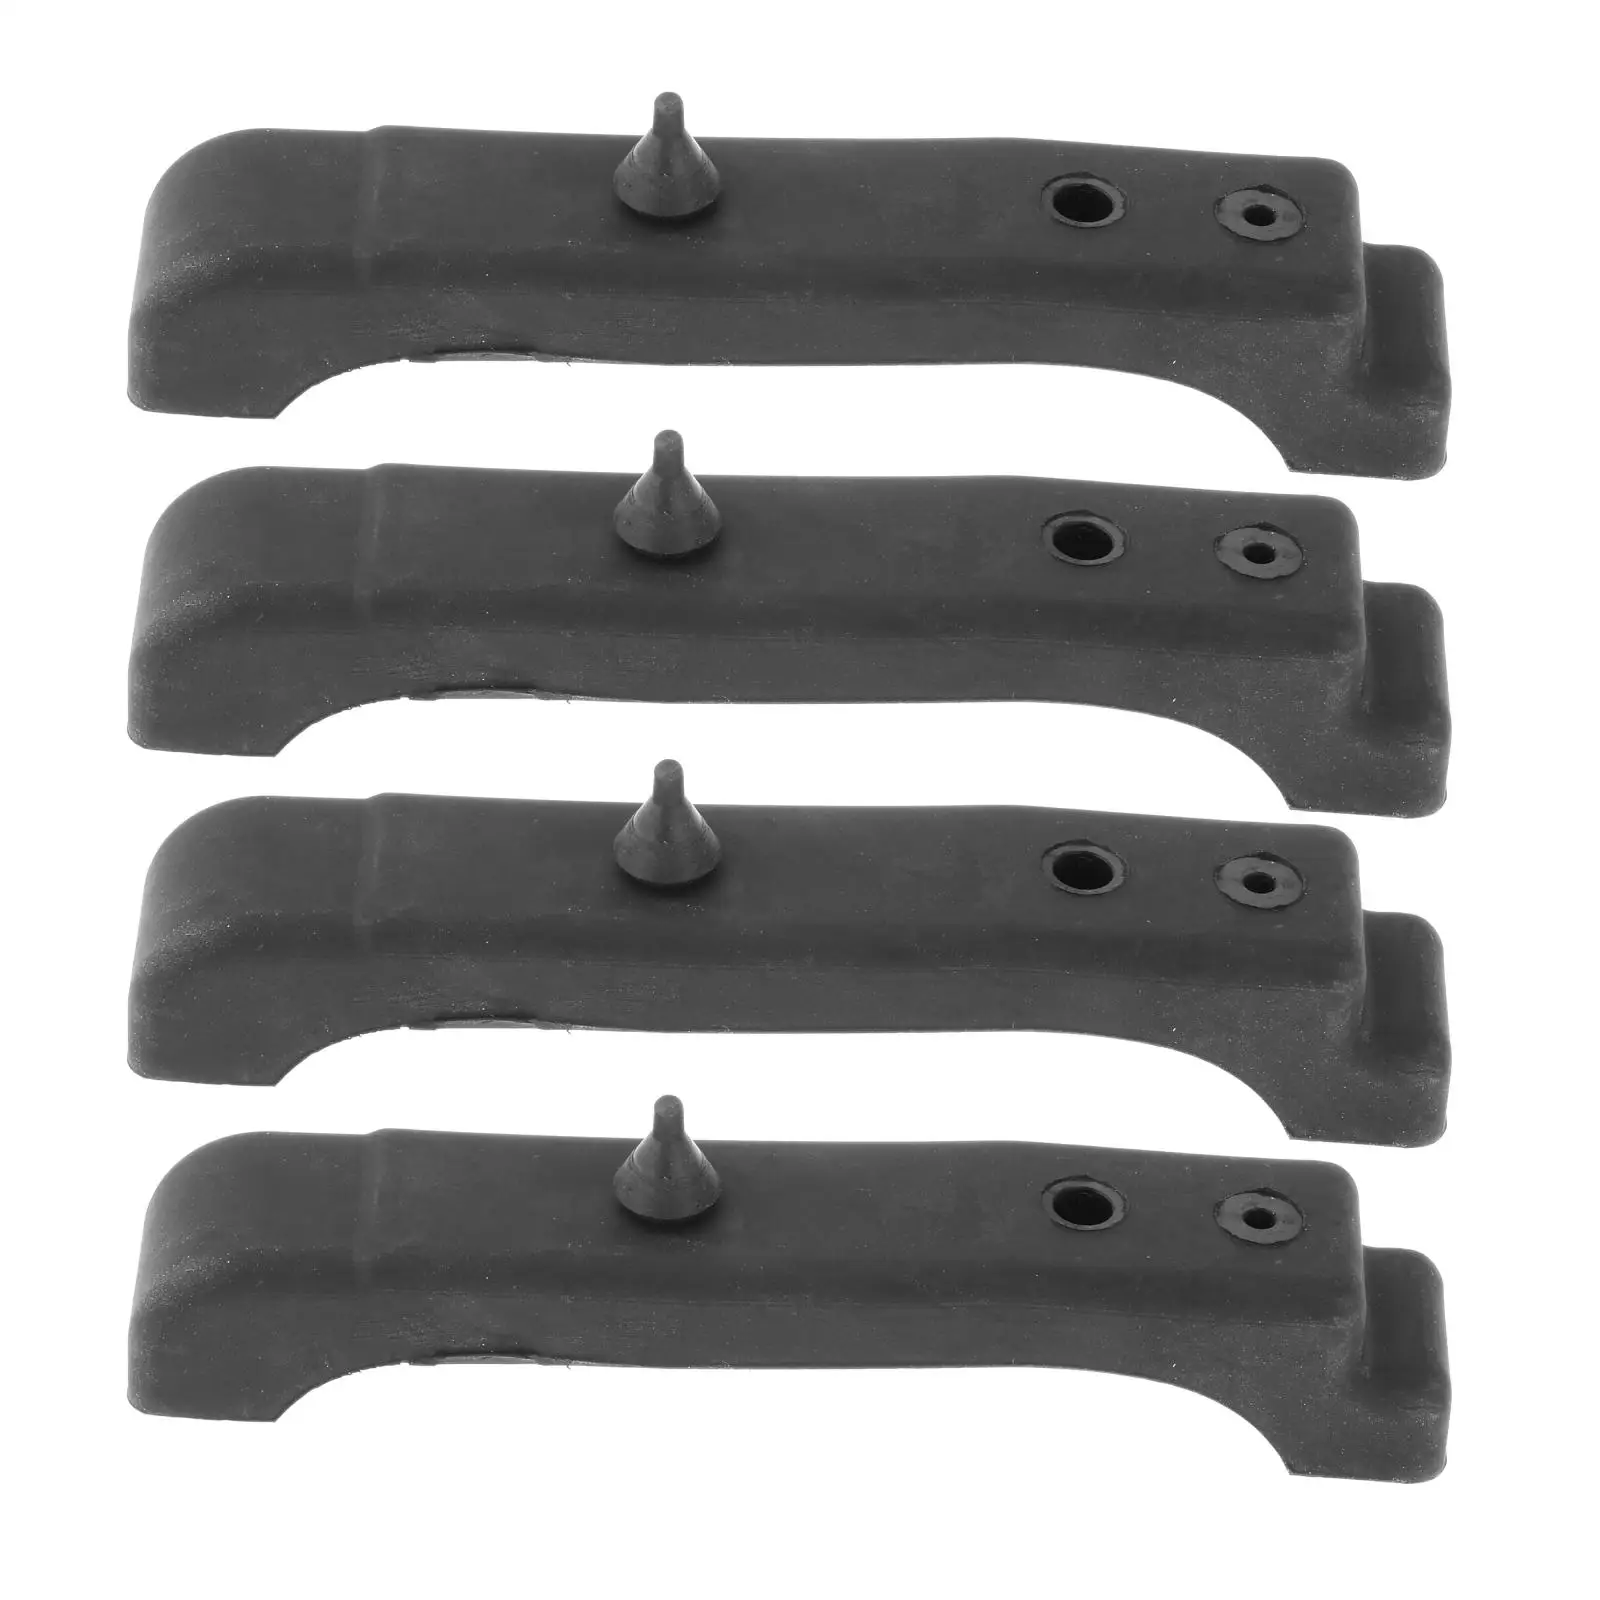 Set of 4 New Cars Rubber 4 Core Radiator Mounting Cushion Support Pad for GM 4012-326-682S